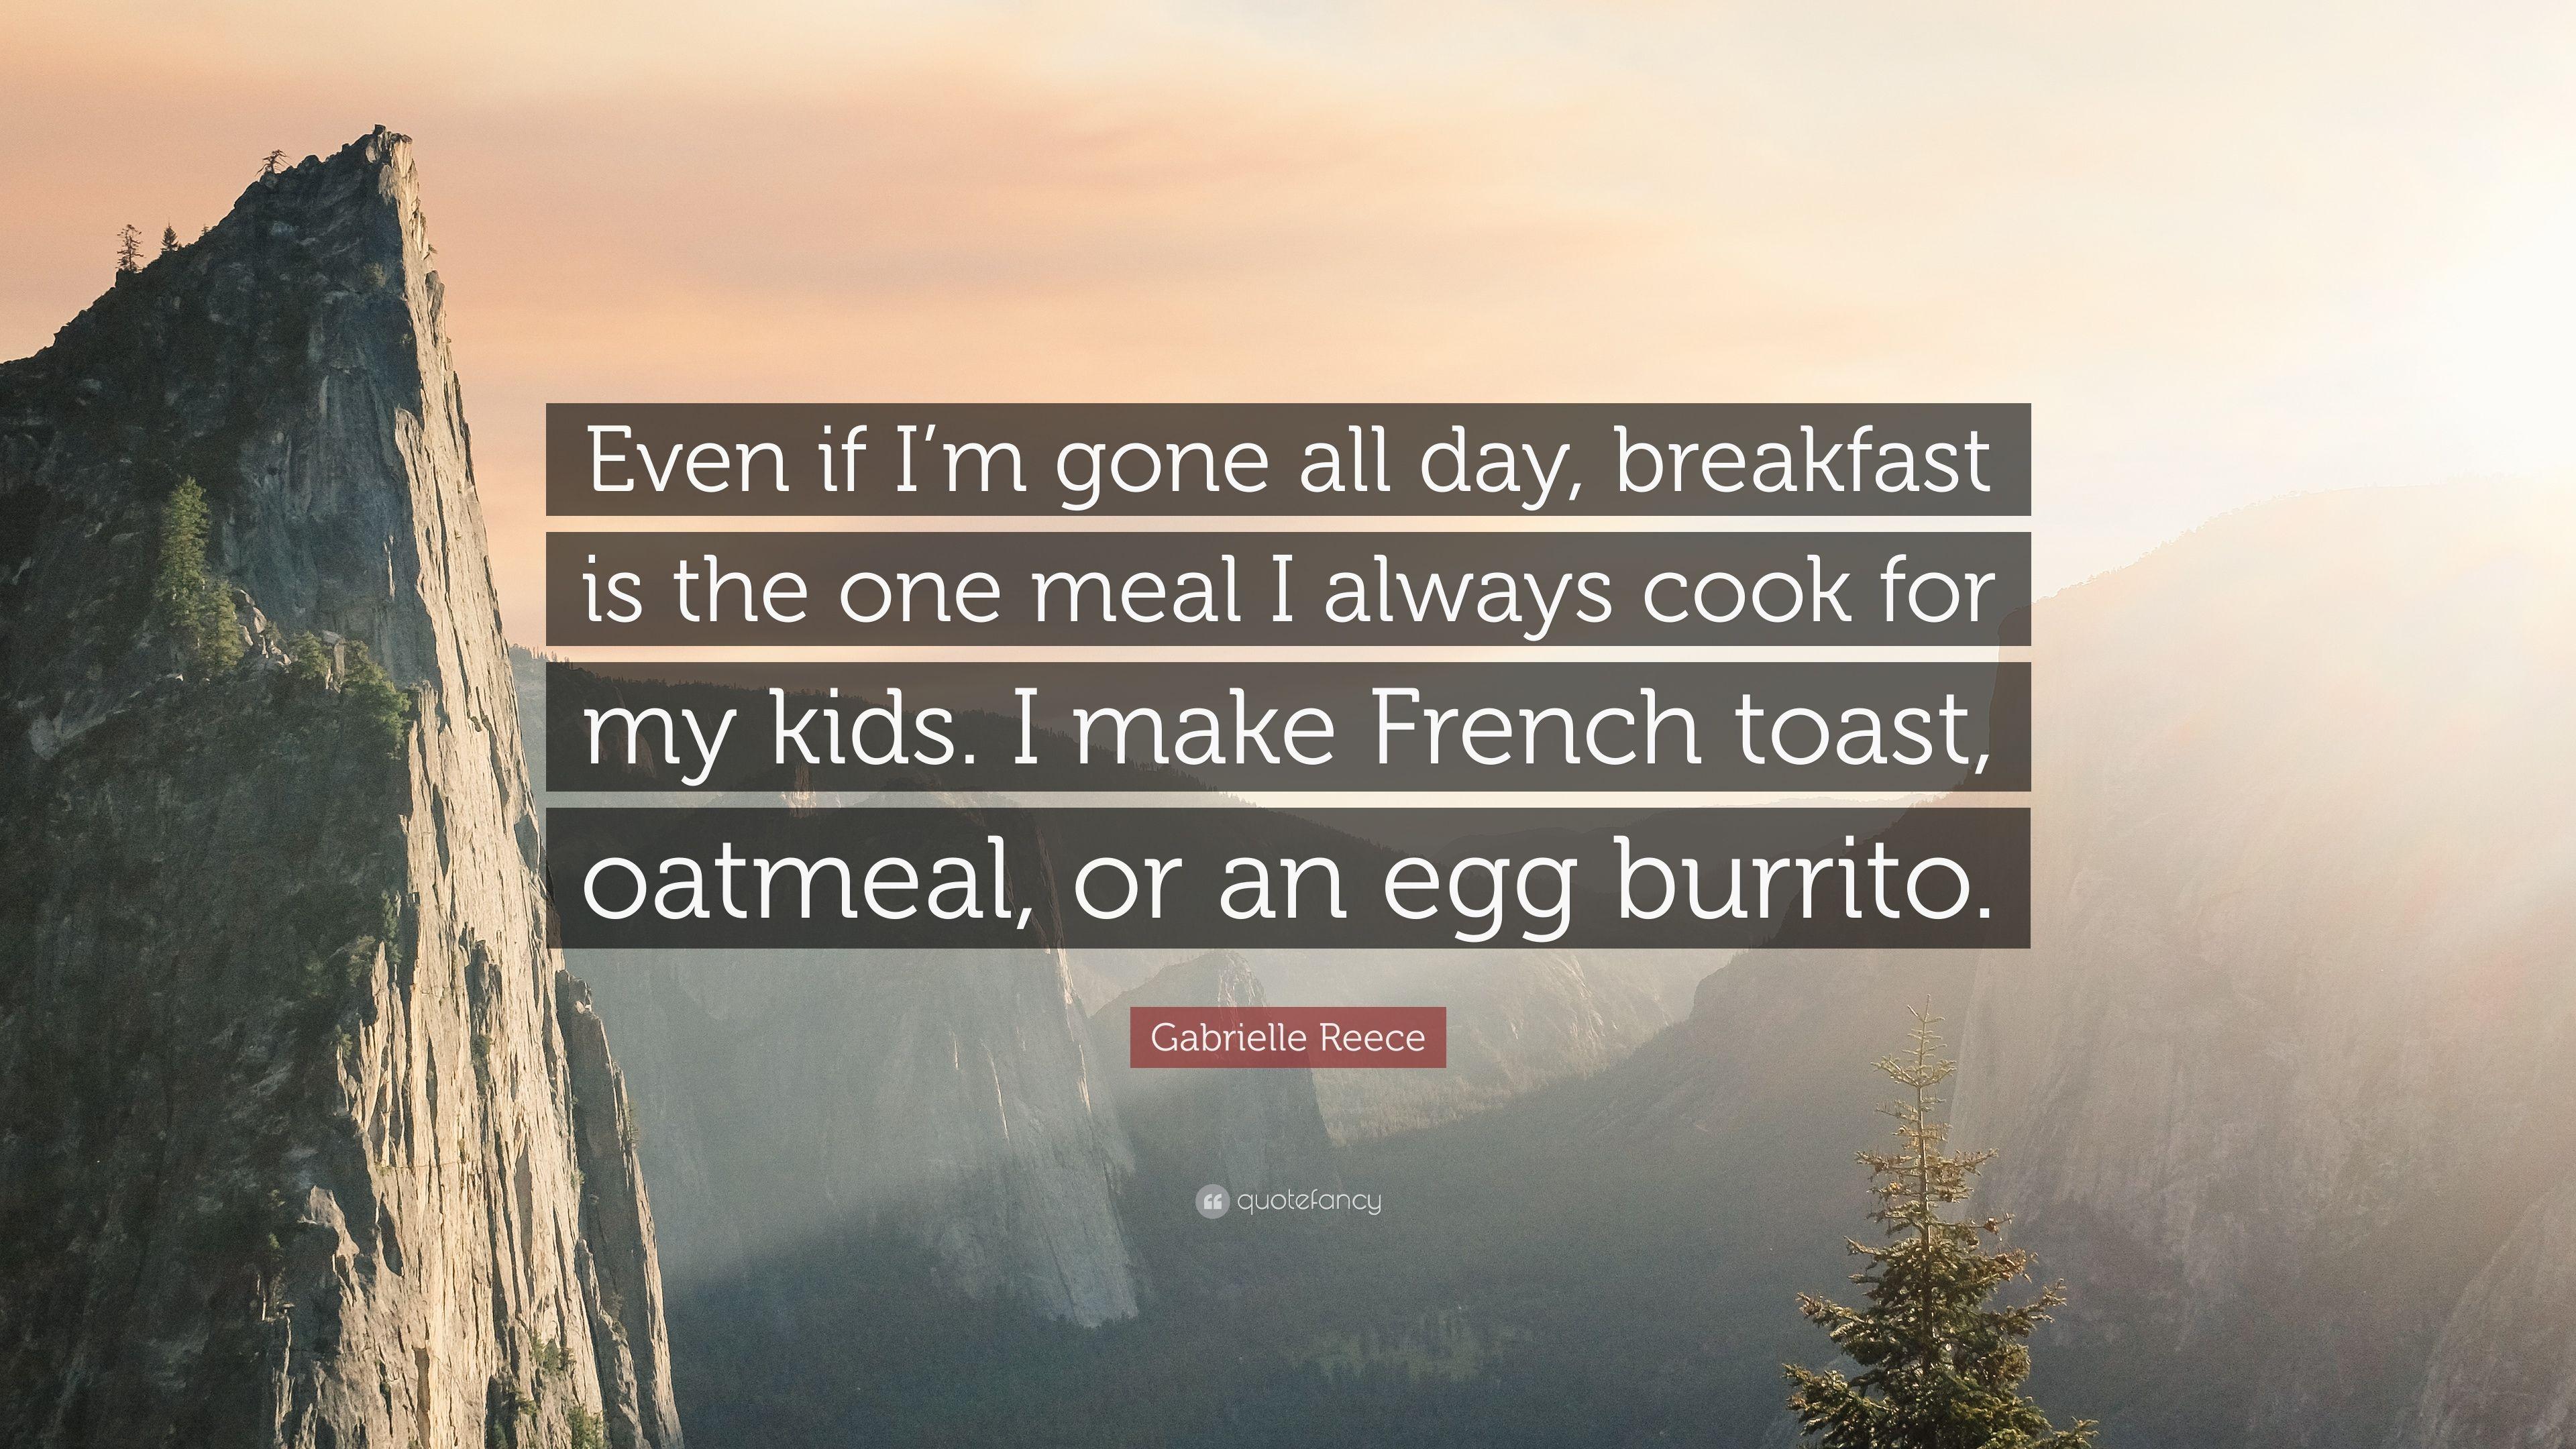 Gabrielle Reece Quote: “Even if I'm gone all day, breakfast is